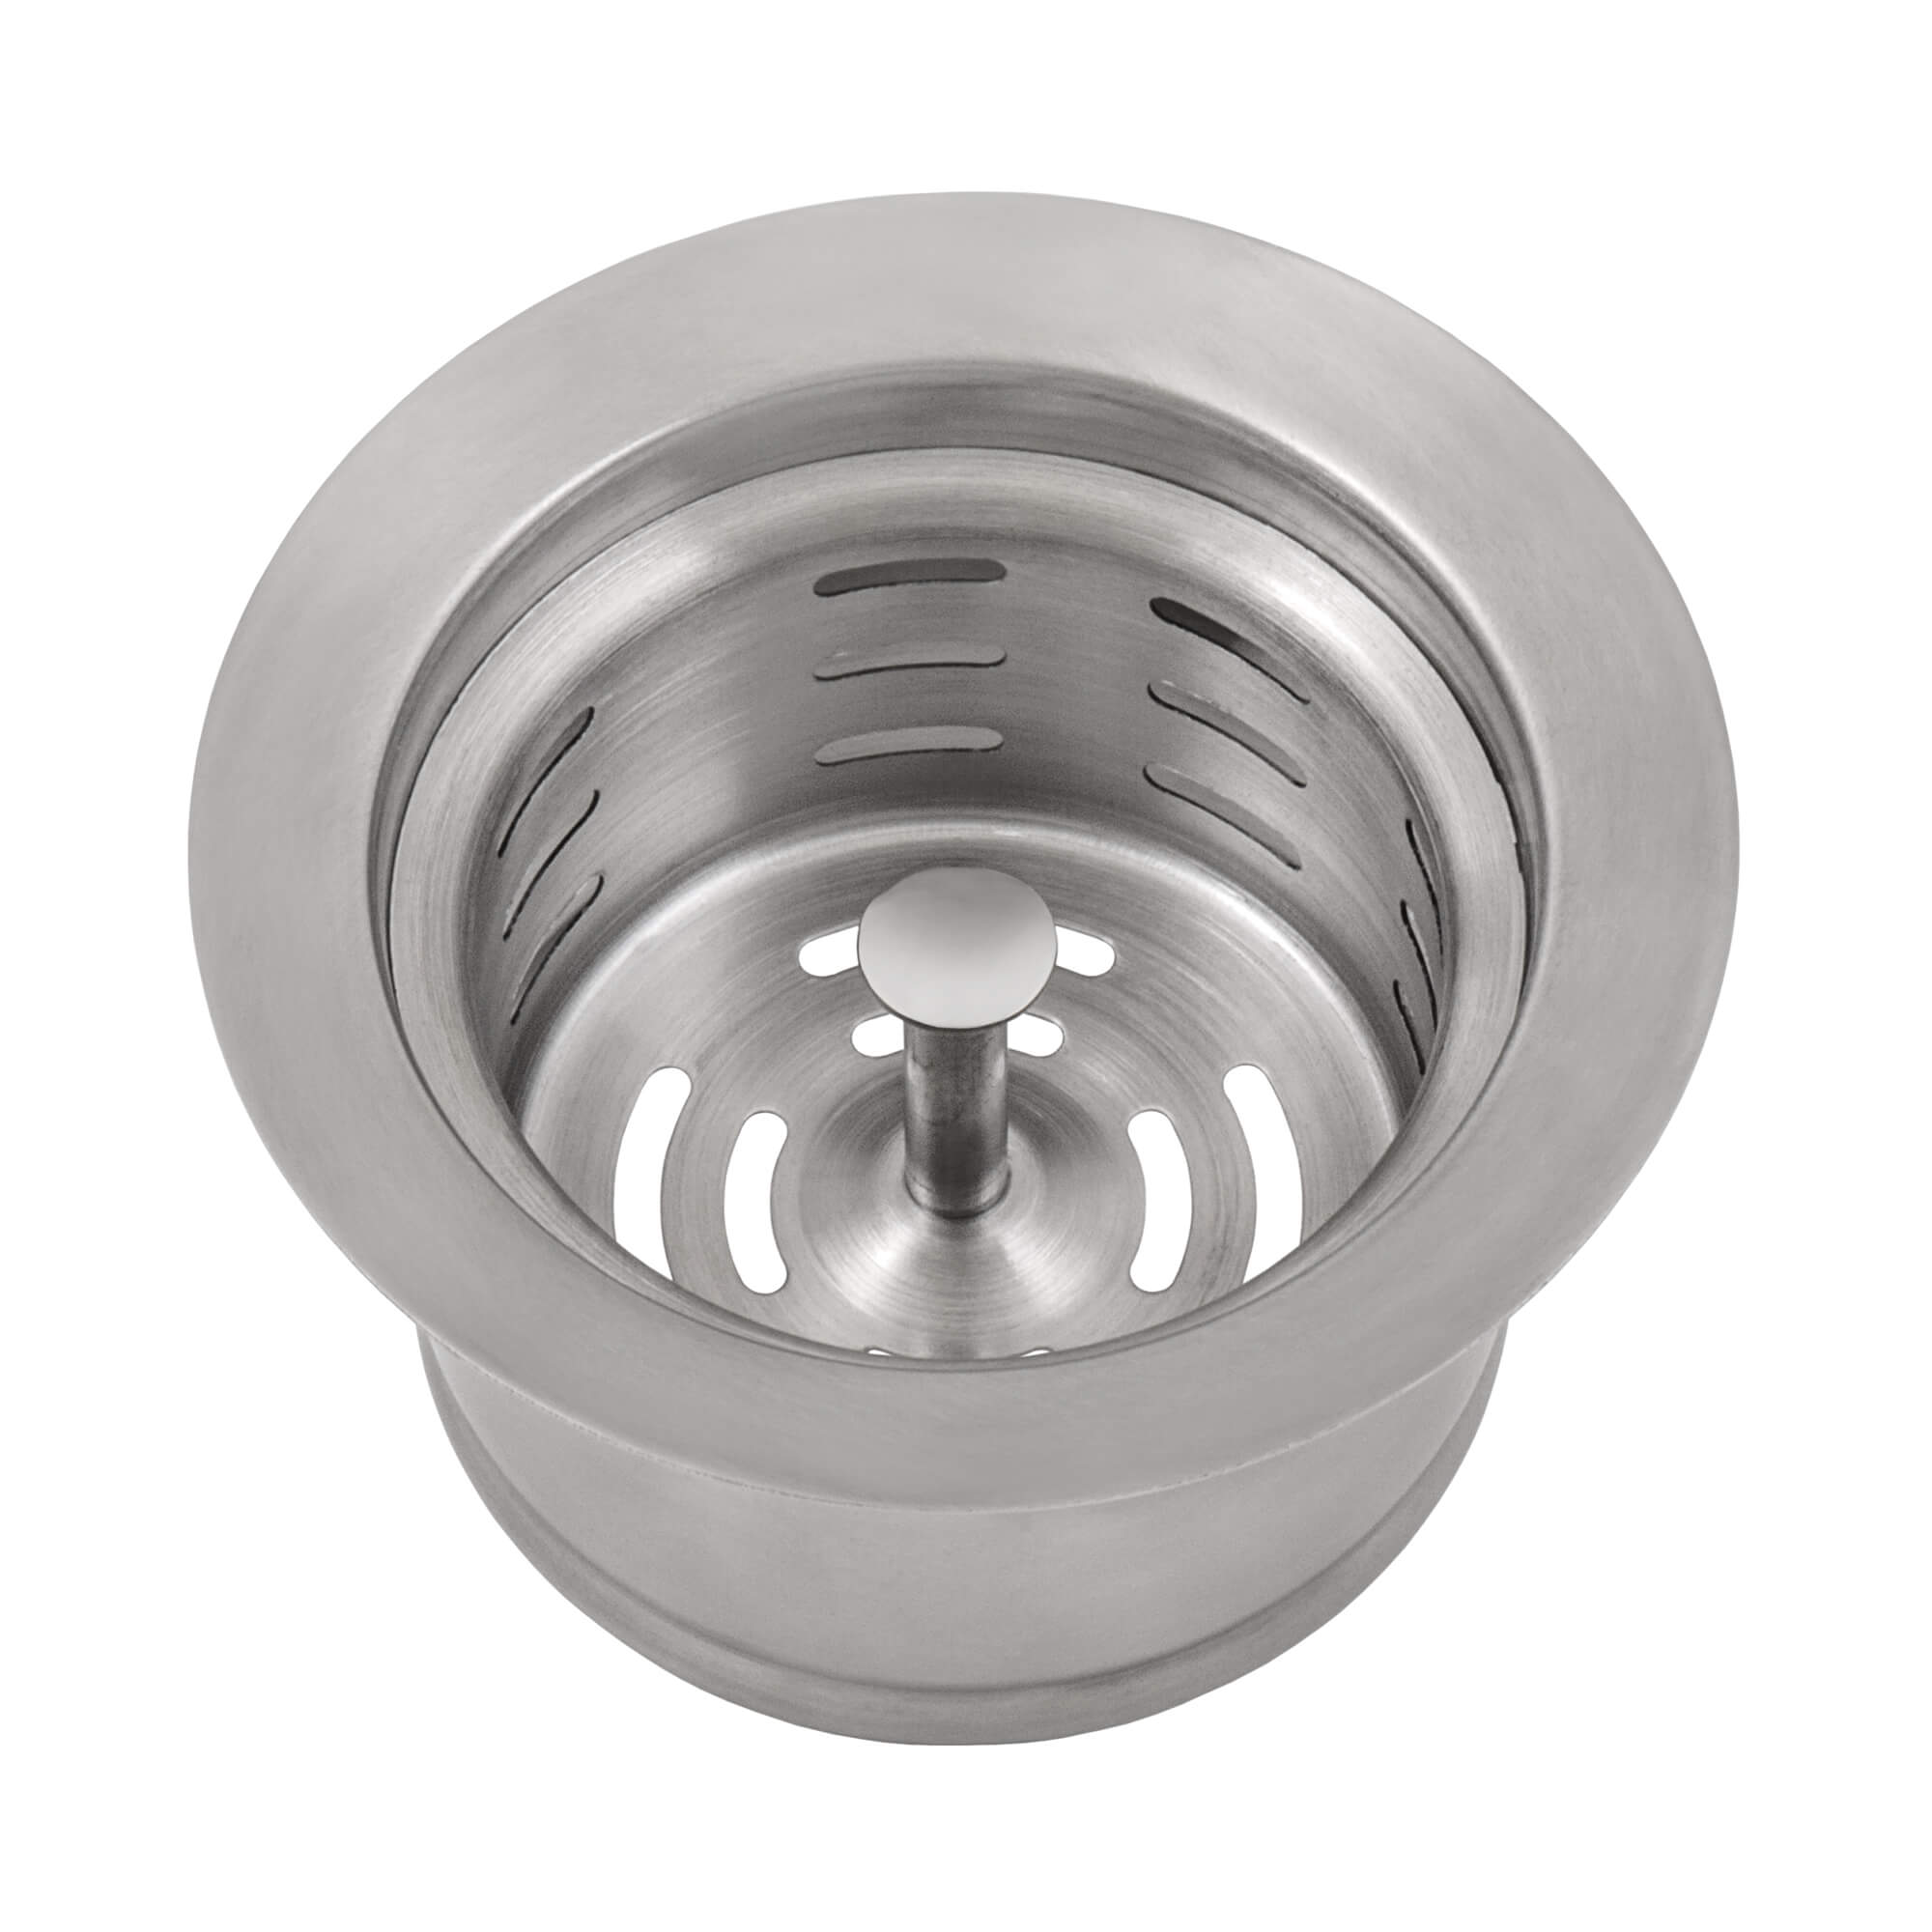 Ruvati Extended Garbage Disposal Flange with Deep Basket Strainer for Kitchen  Sinks - Stainless Steel - RVA1049ST - Ruvati USA